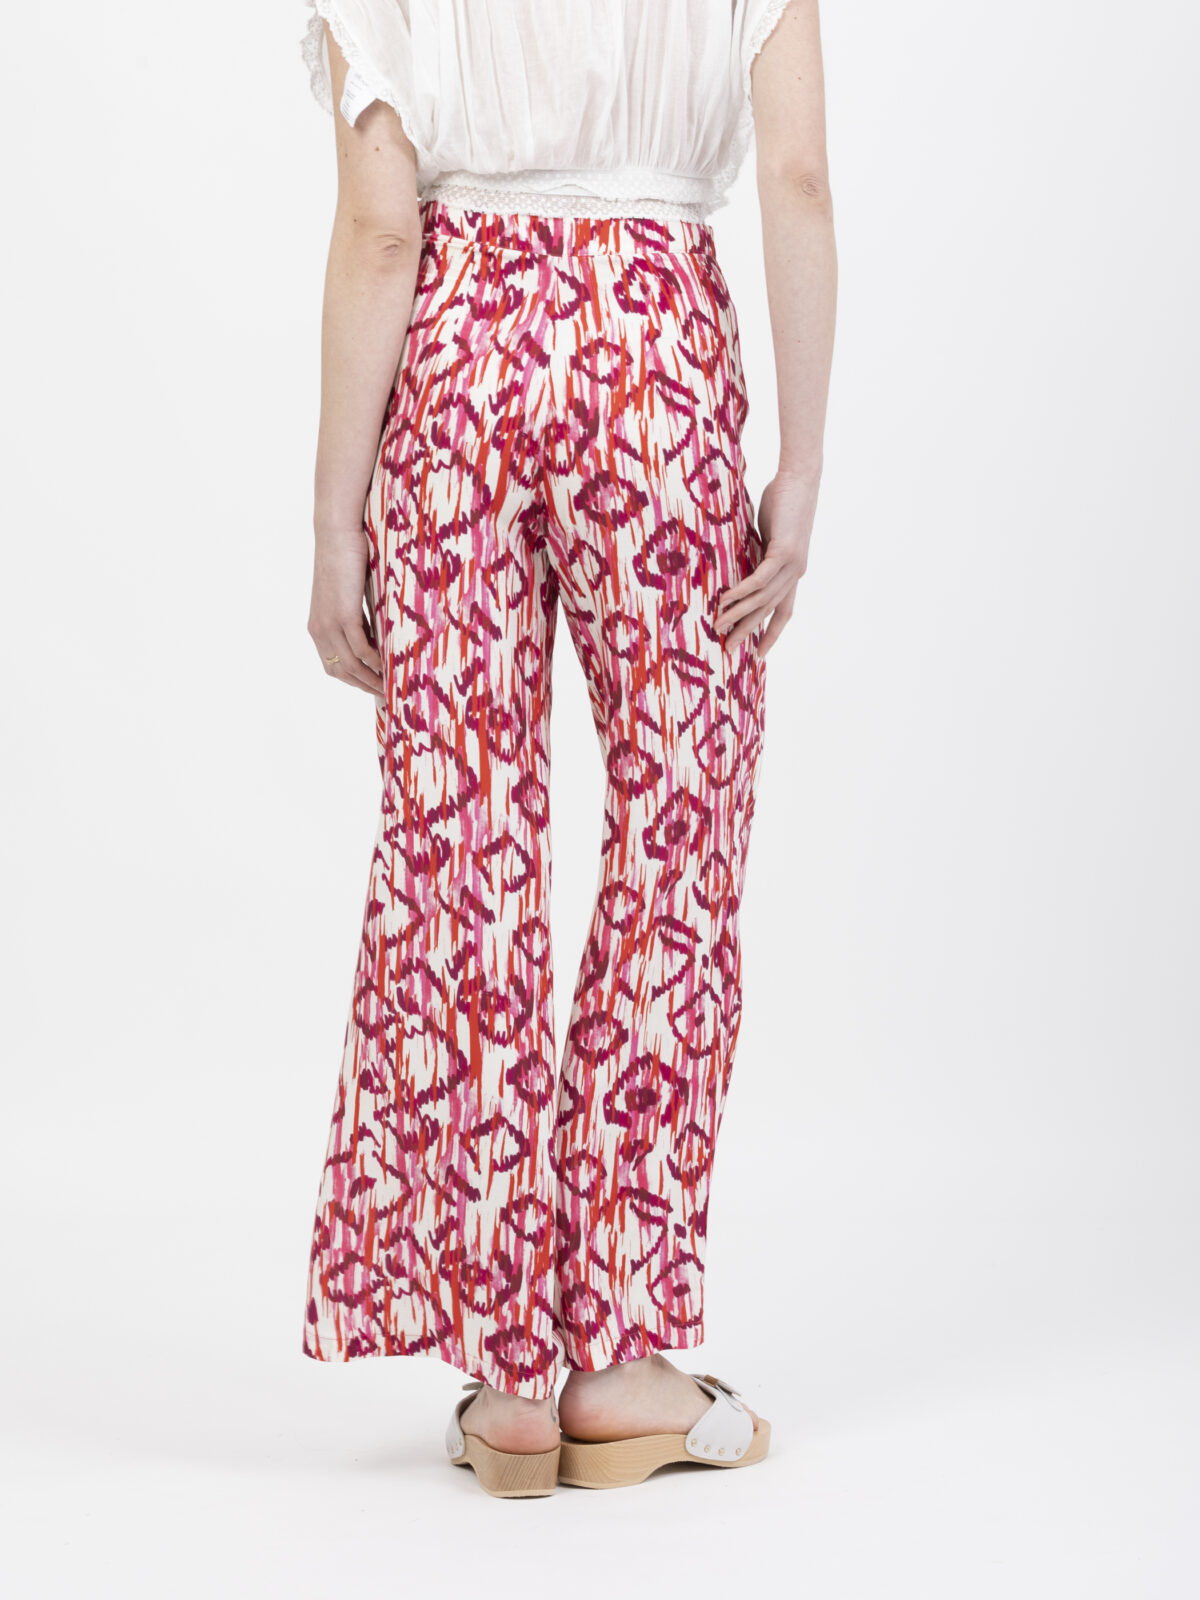 sienna-uniforme-athens-loose-trousers-african-print-matchbox-athens-boutique-buy